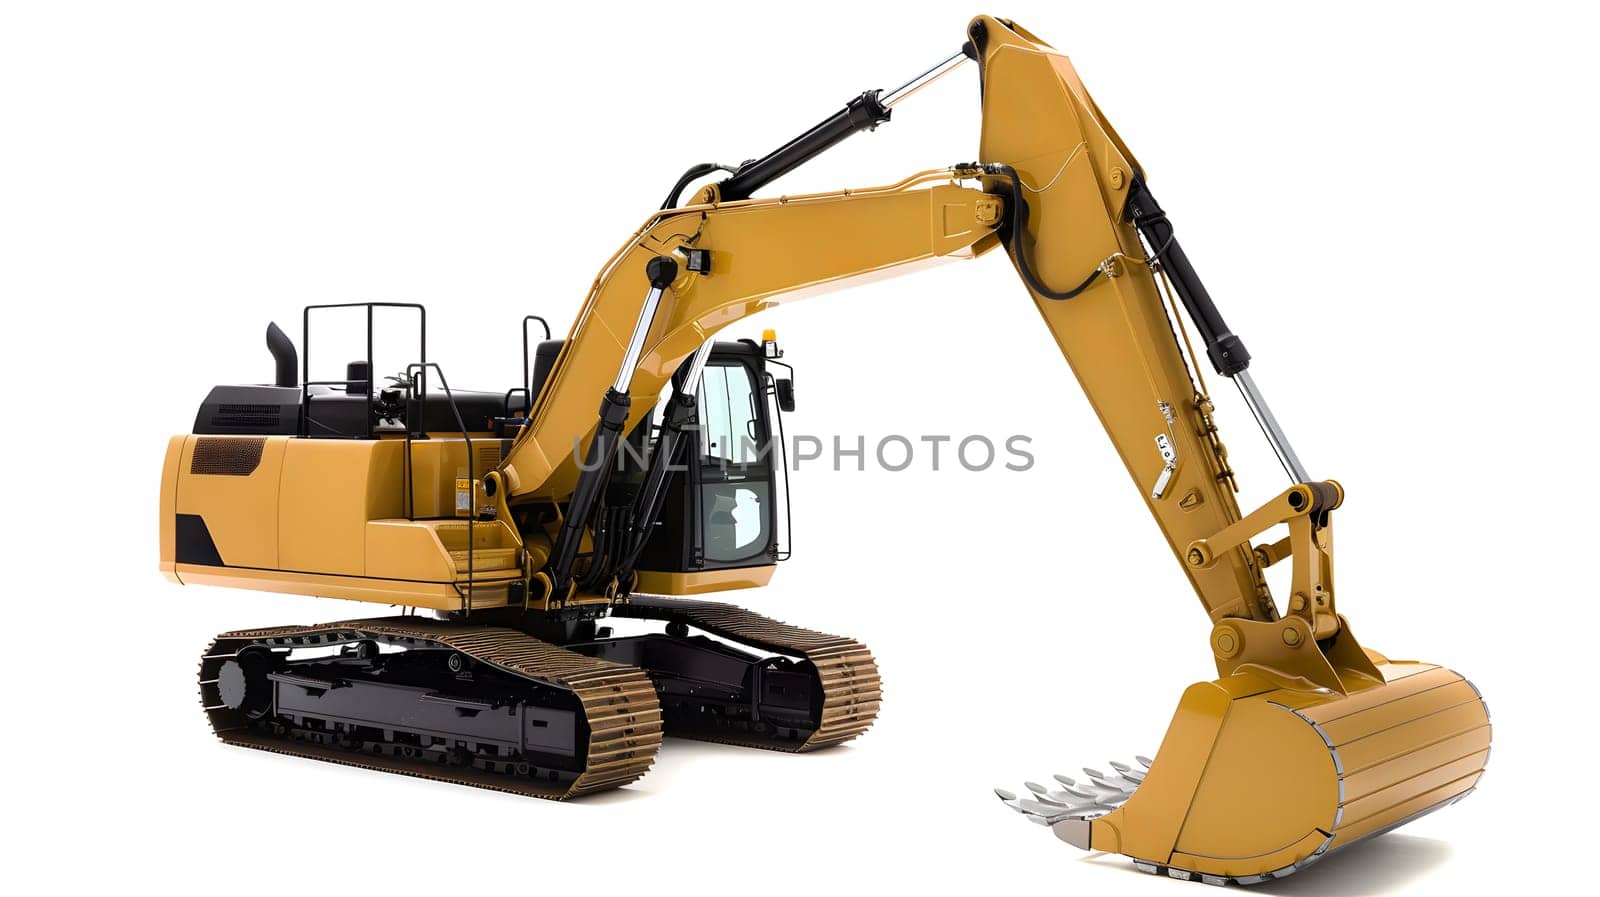 A yellow excavator with a large bucket, a vehicle used in construction, stands on a white background. The engineering marvel is made of composite material and resembles a toy machine for kids